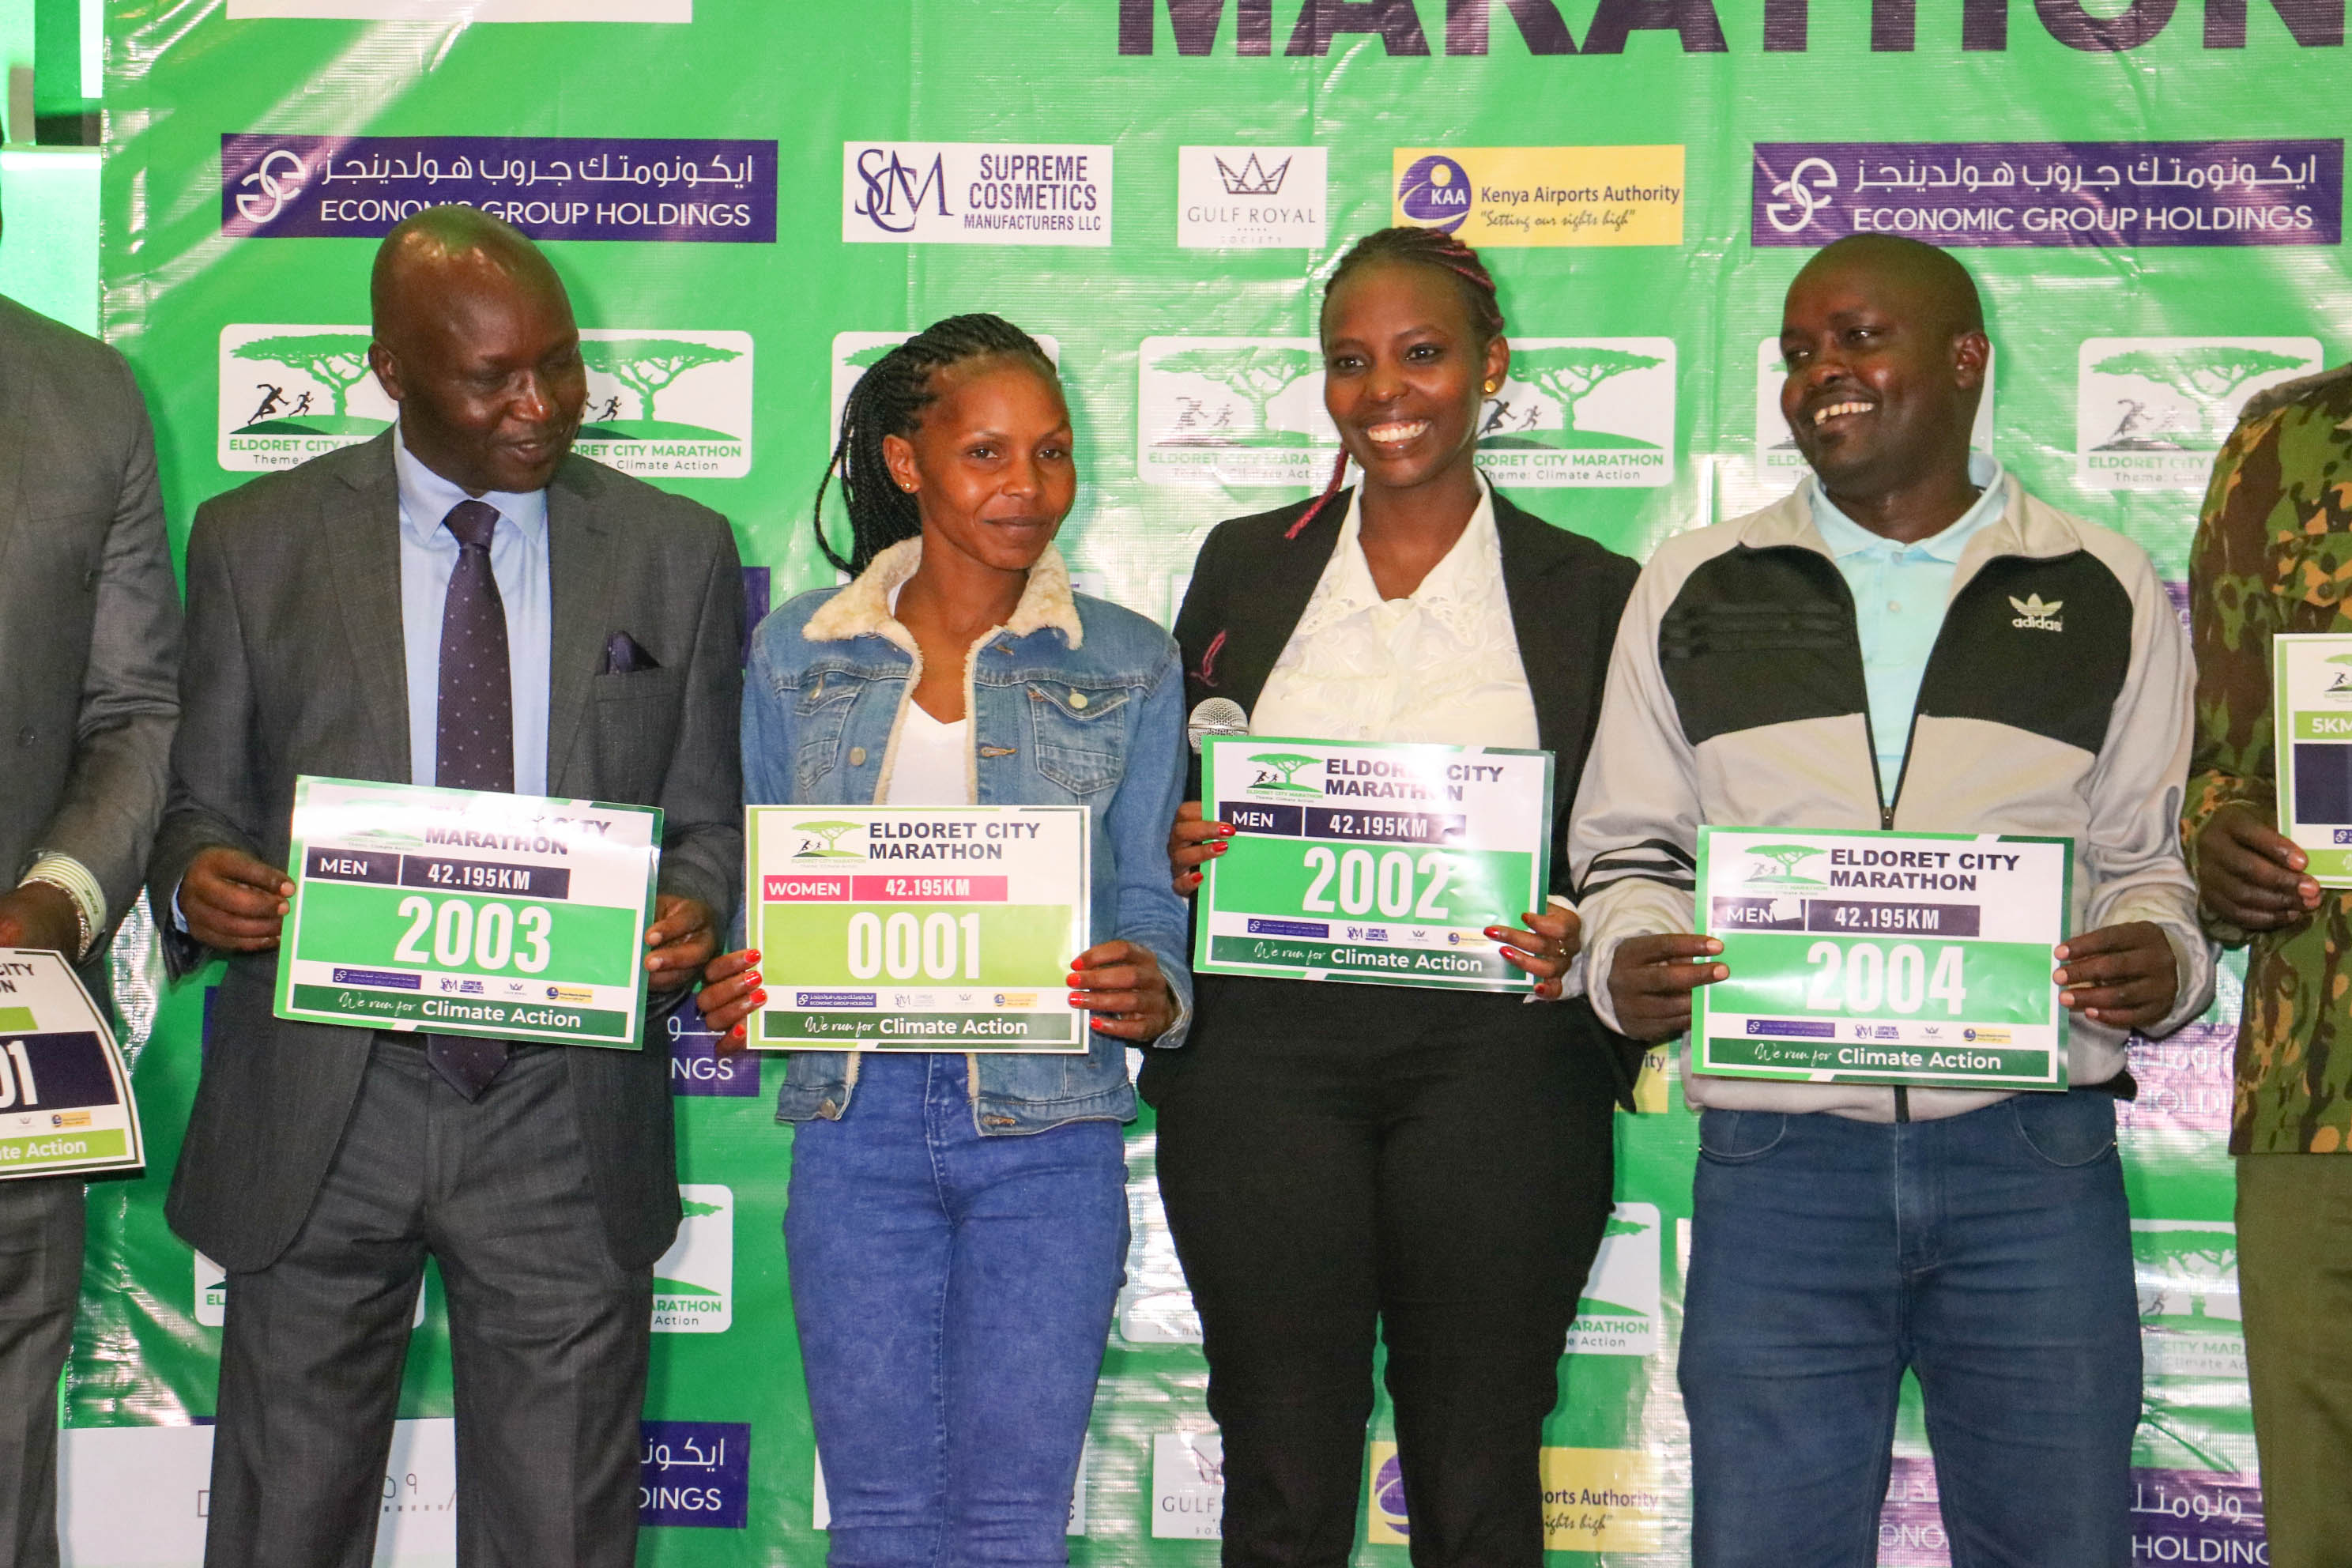 Eldoret City Marathon 5th Edition Officially Launched